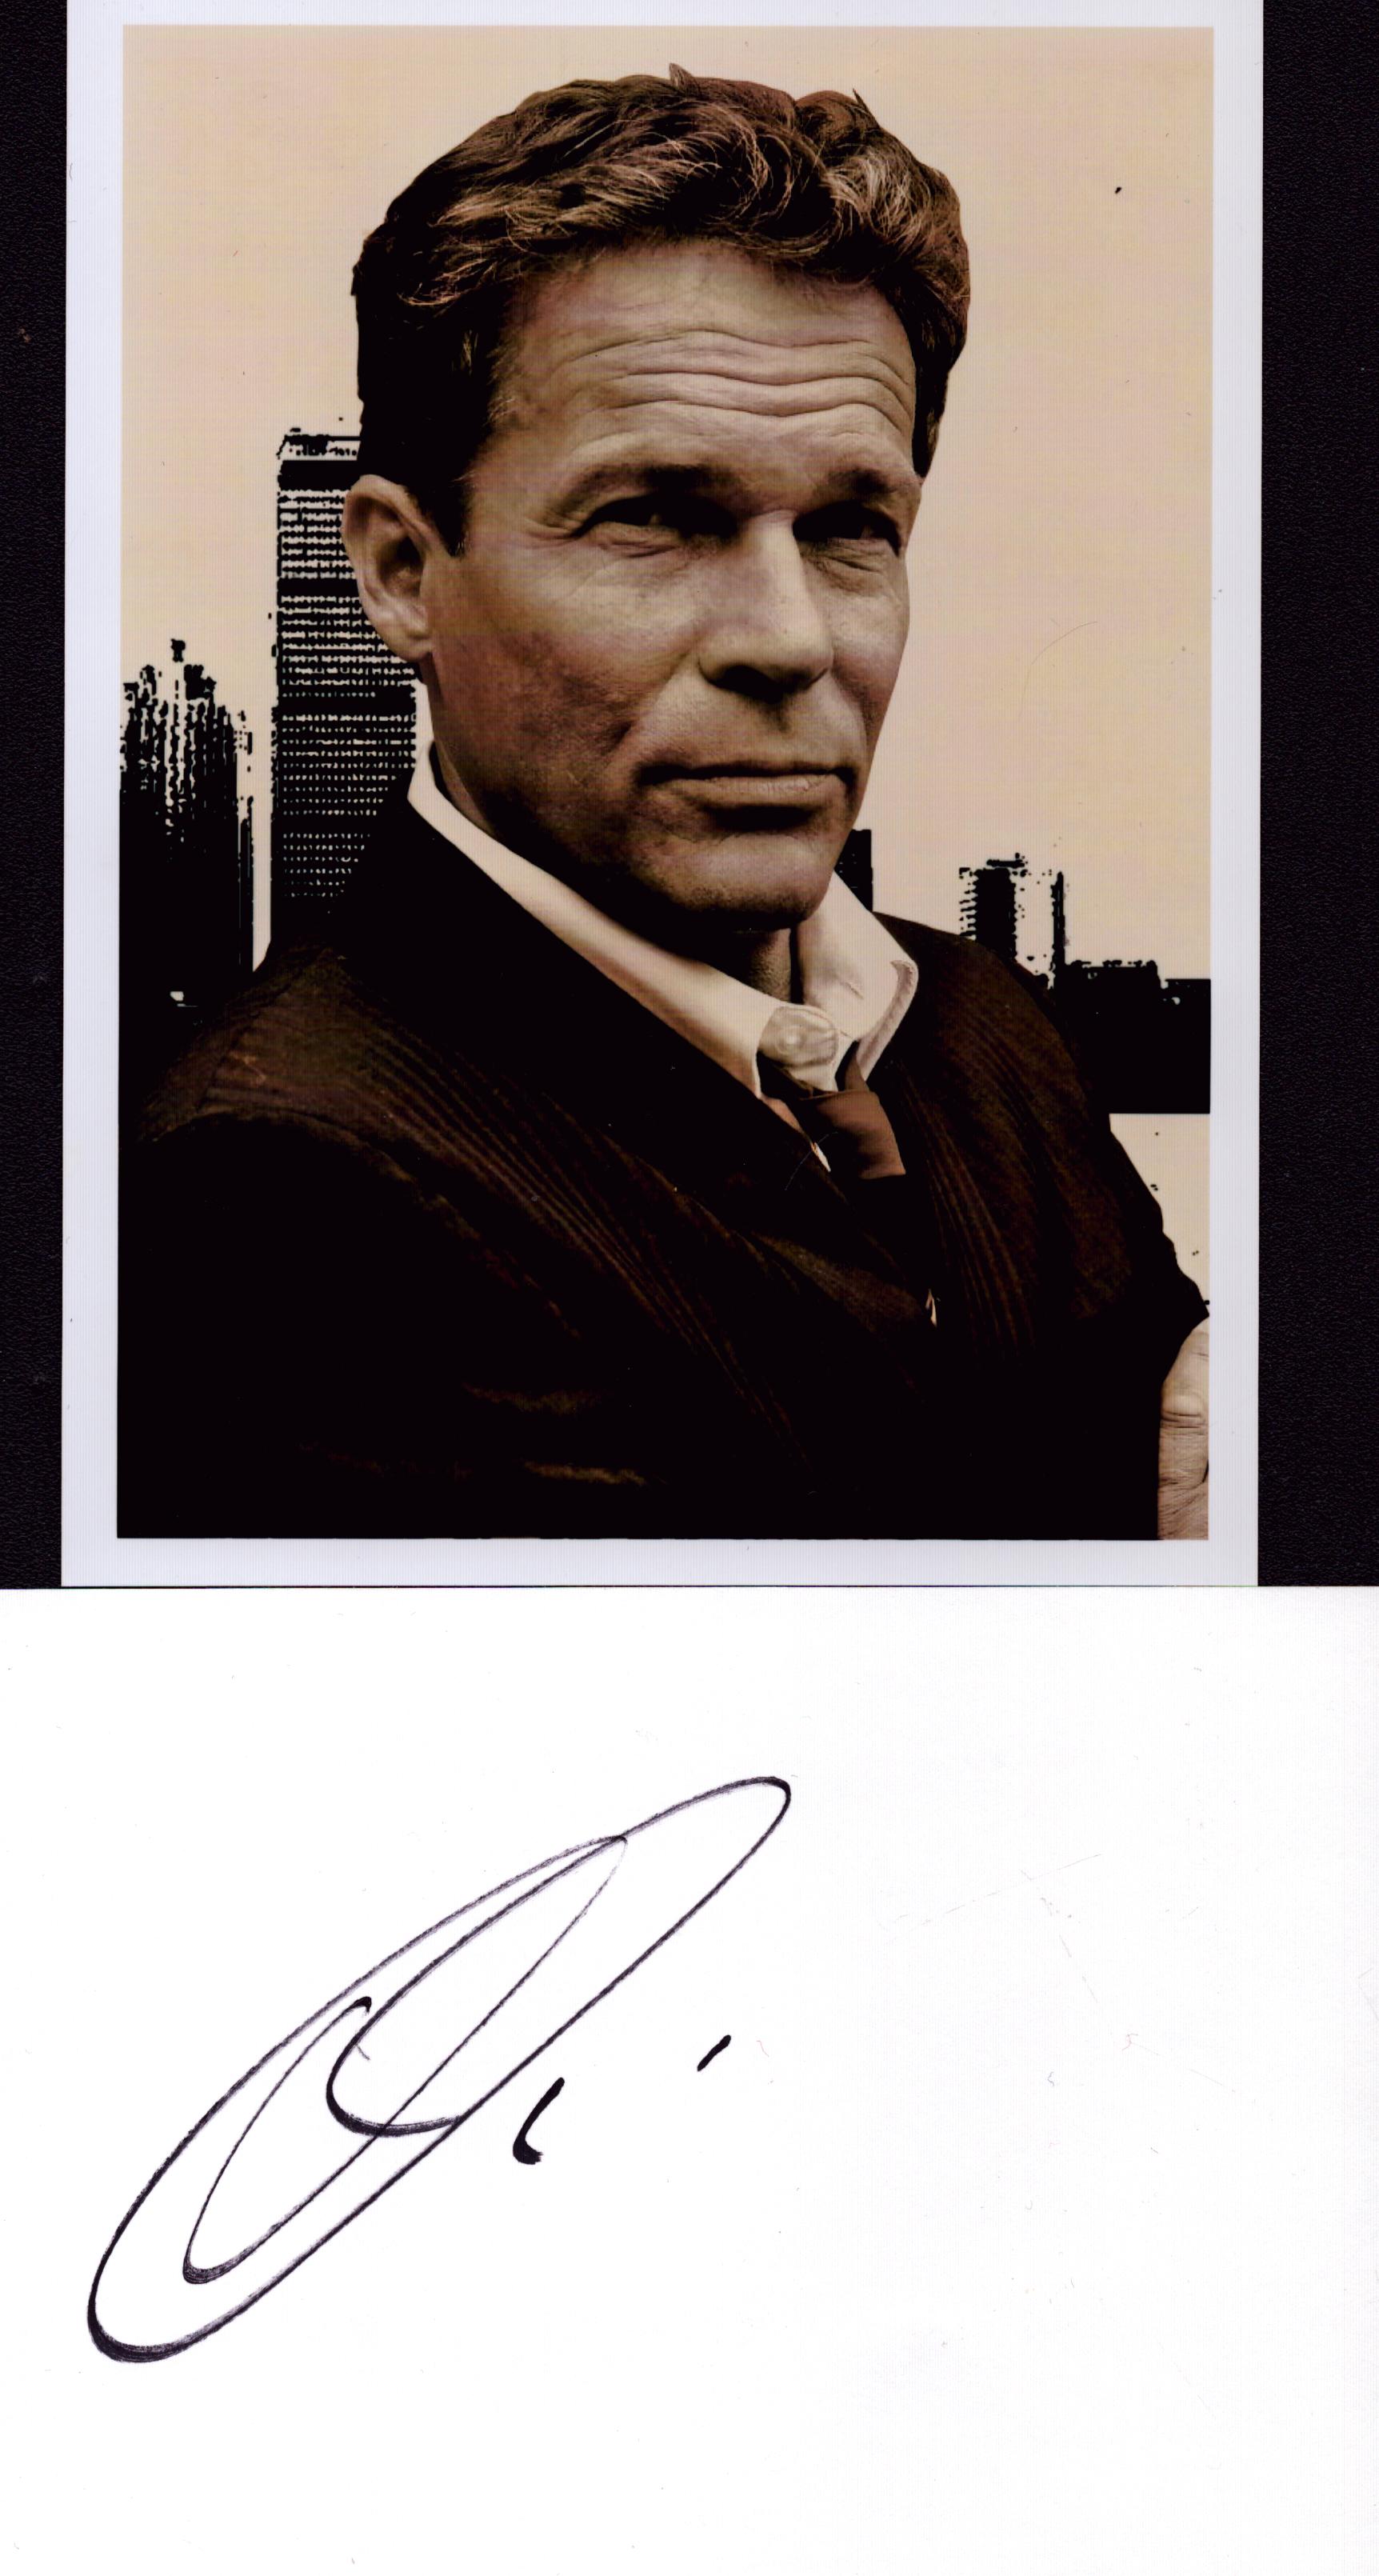 Christian Tramitz signed 6x4inch white card with unsigned 7x5inch black and white photo. Good